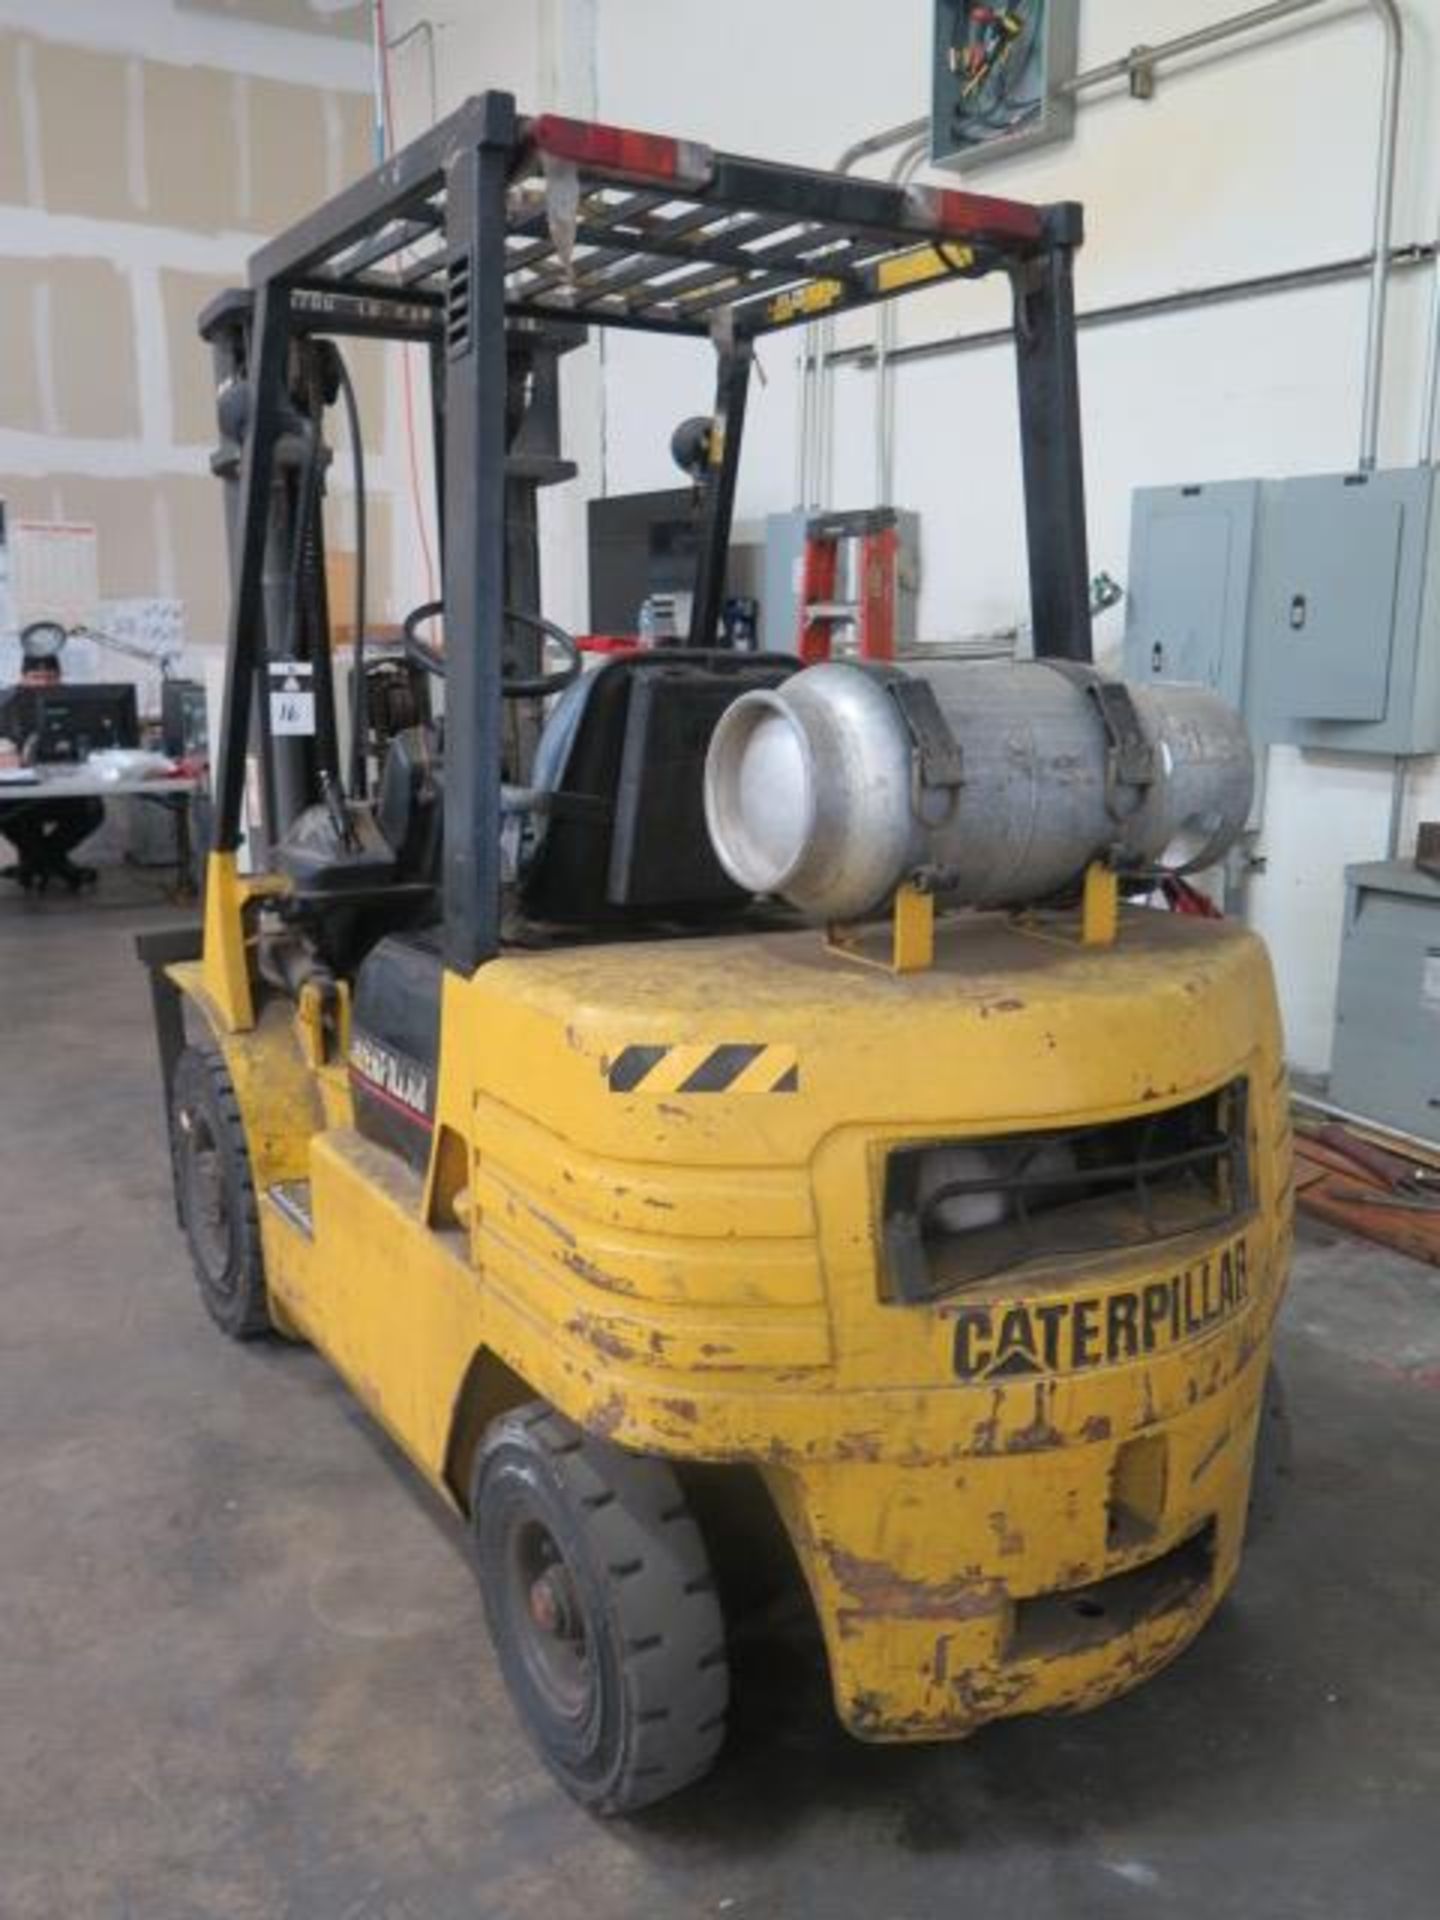 Caterpillar GP25 5000 Lb Cap LPG Forklift s/n 5AM07772 w/ 3-Stage Mast, 190” Lift Height, SOLD AS IS - Image 4 of 15